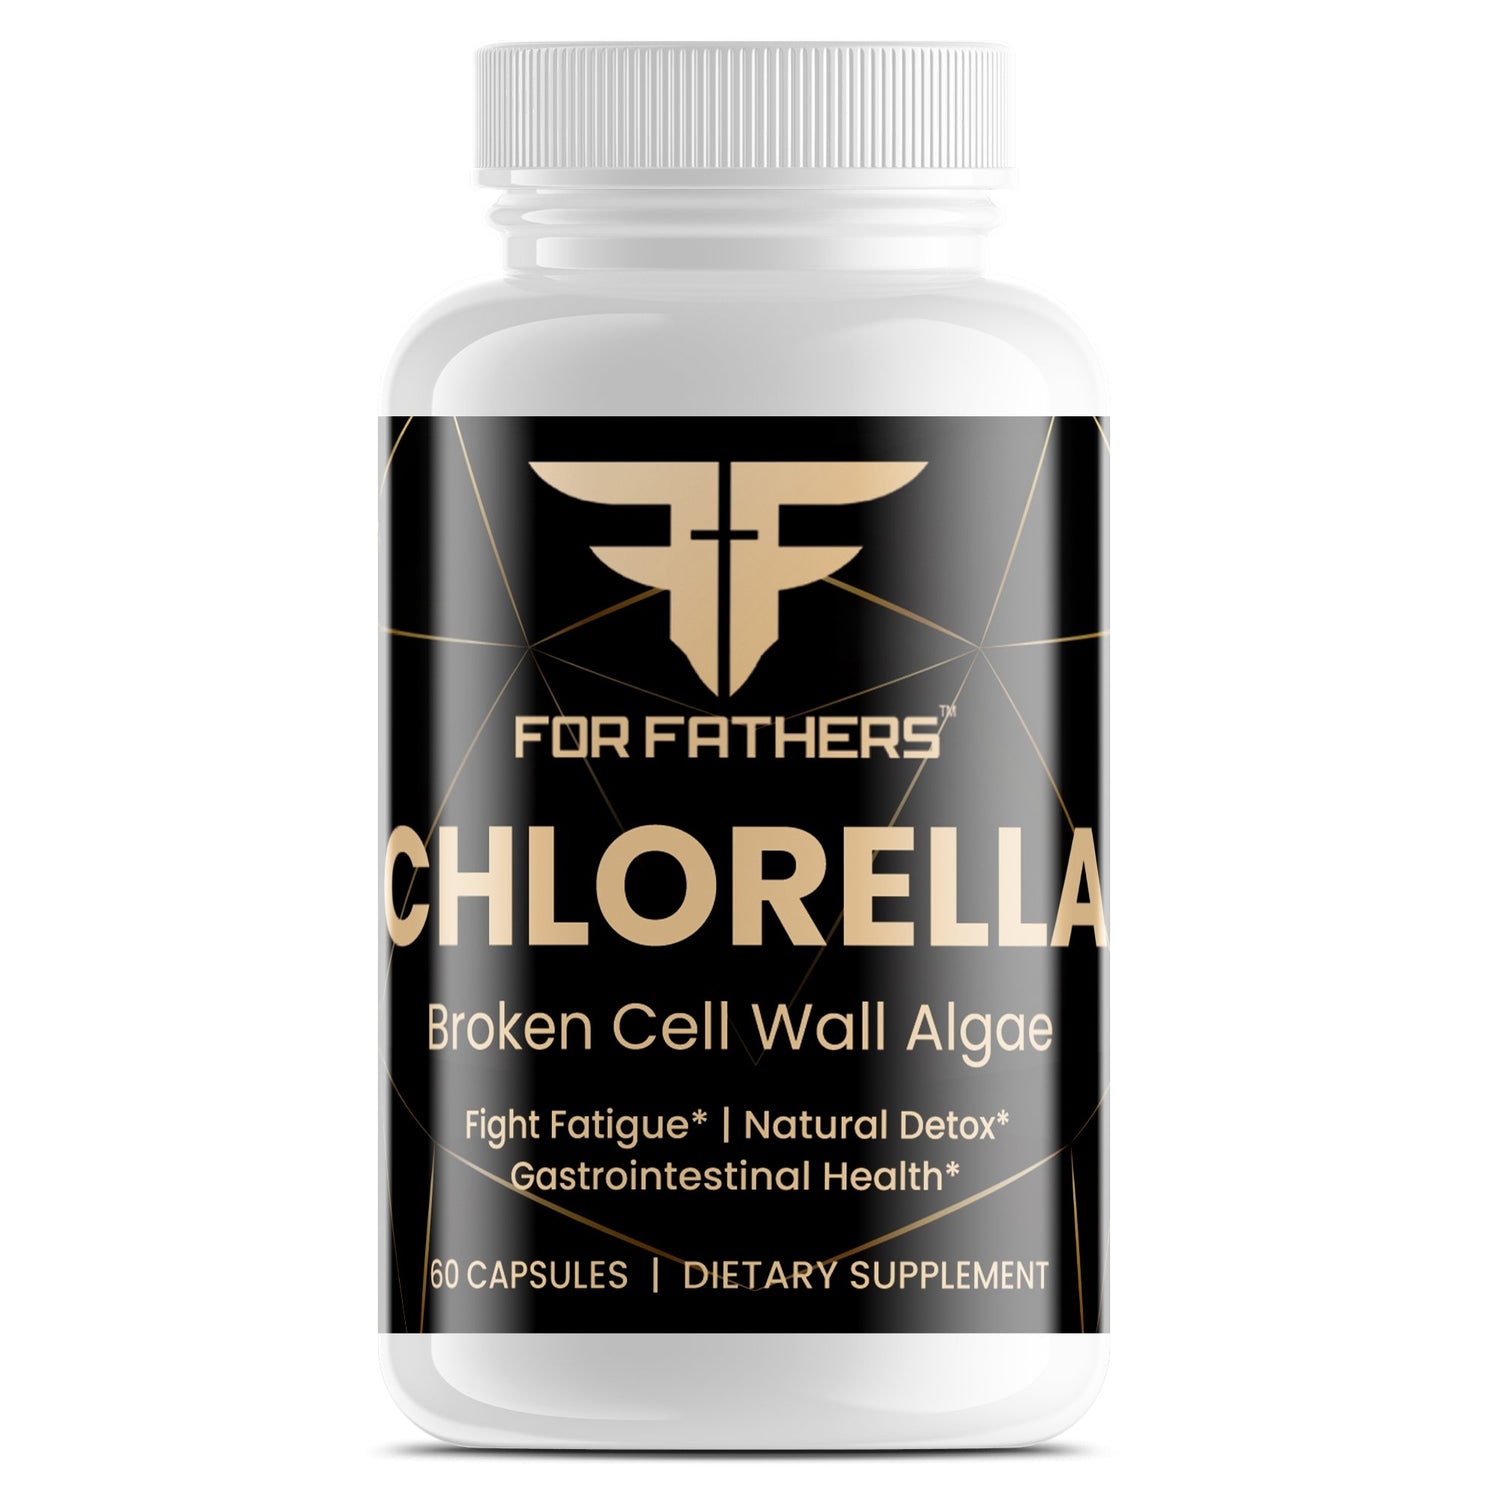 Organic Chlorella Tablets with Broken Cell Wall for Maximum Nutrition - For Fathers Fitness